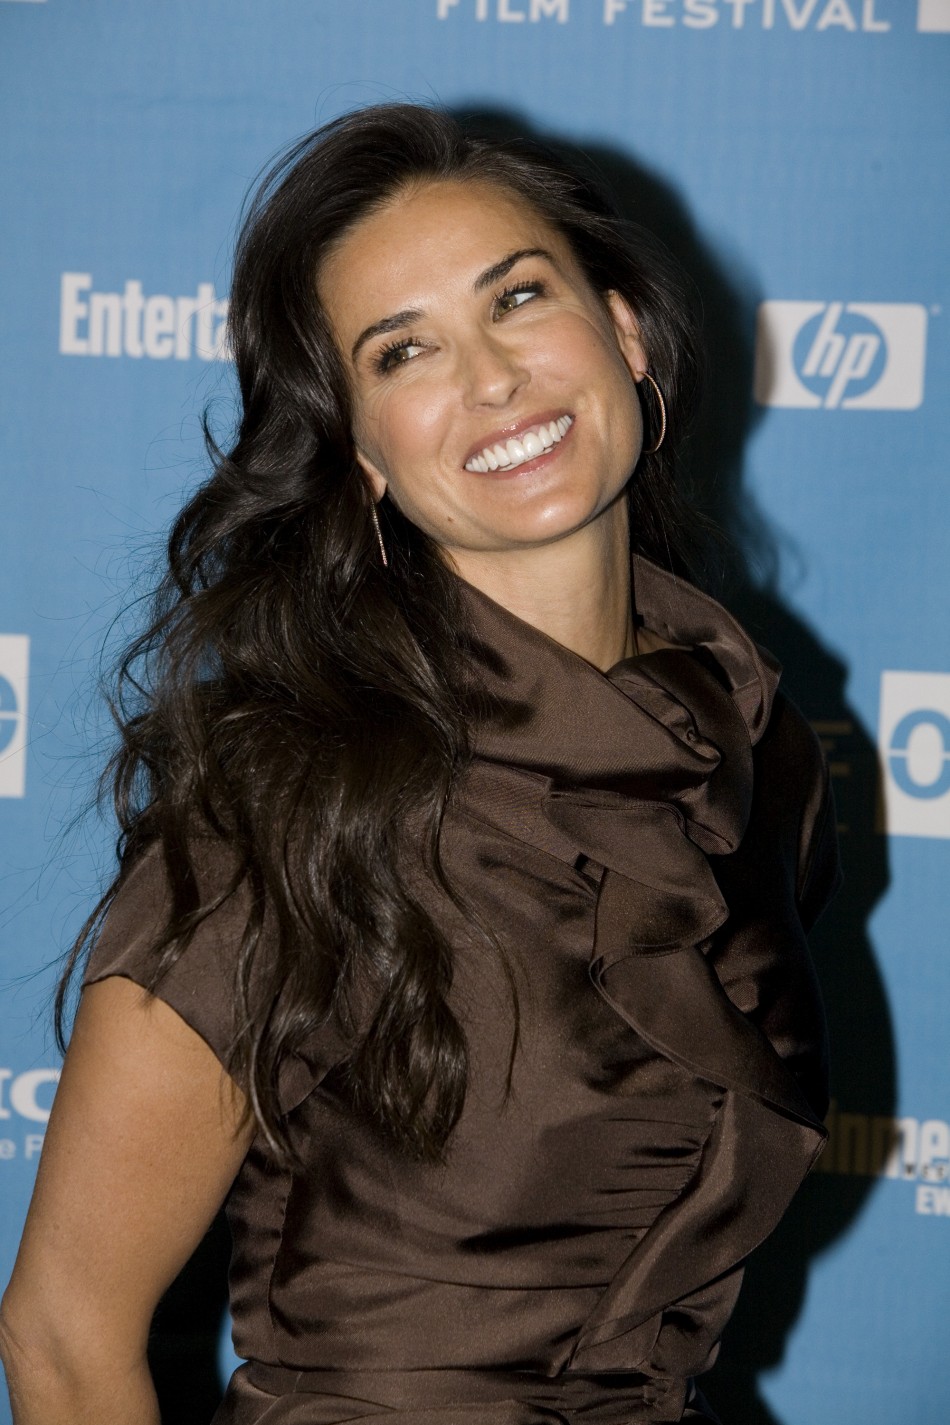 Actress Demi Moore attends the premiere of the movie quotSpreadquot during the 2009 Sundance Film Festival in Park City, Utah.